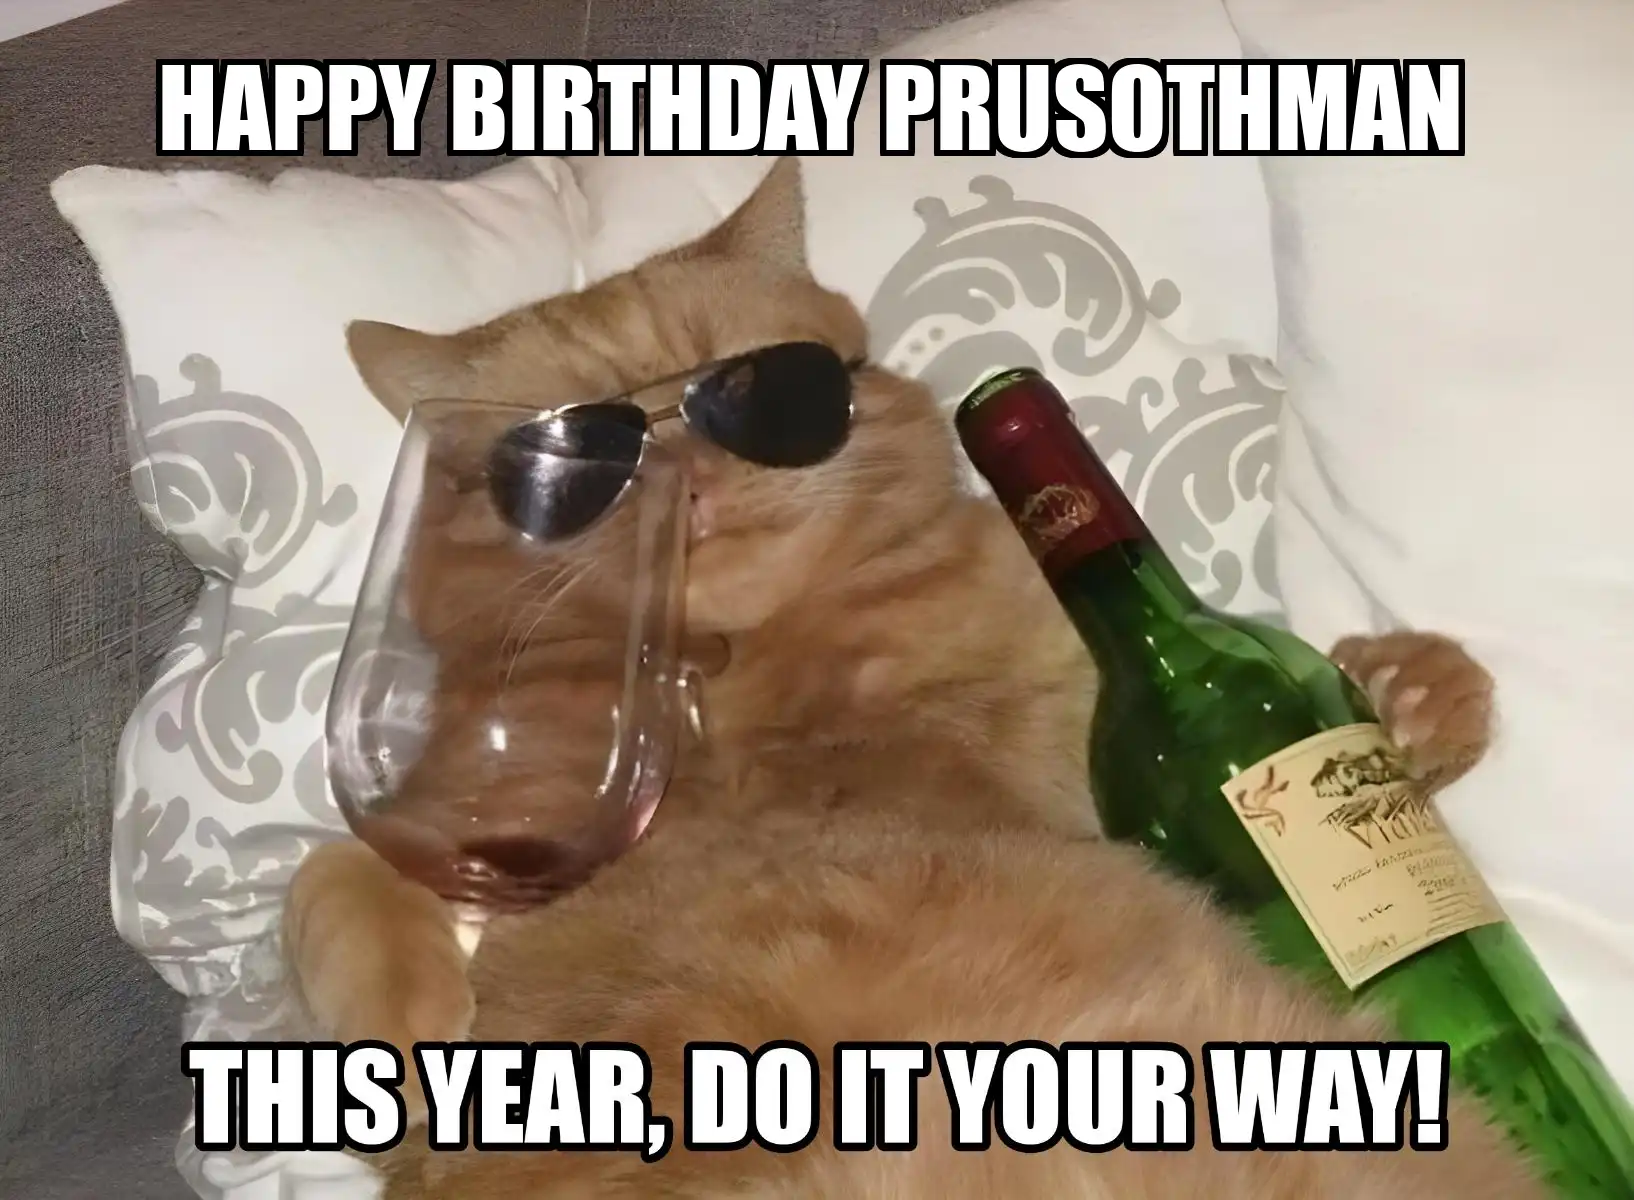 Happy Birthday Prusothman This Year Do It Your Way Meme